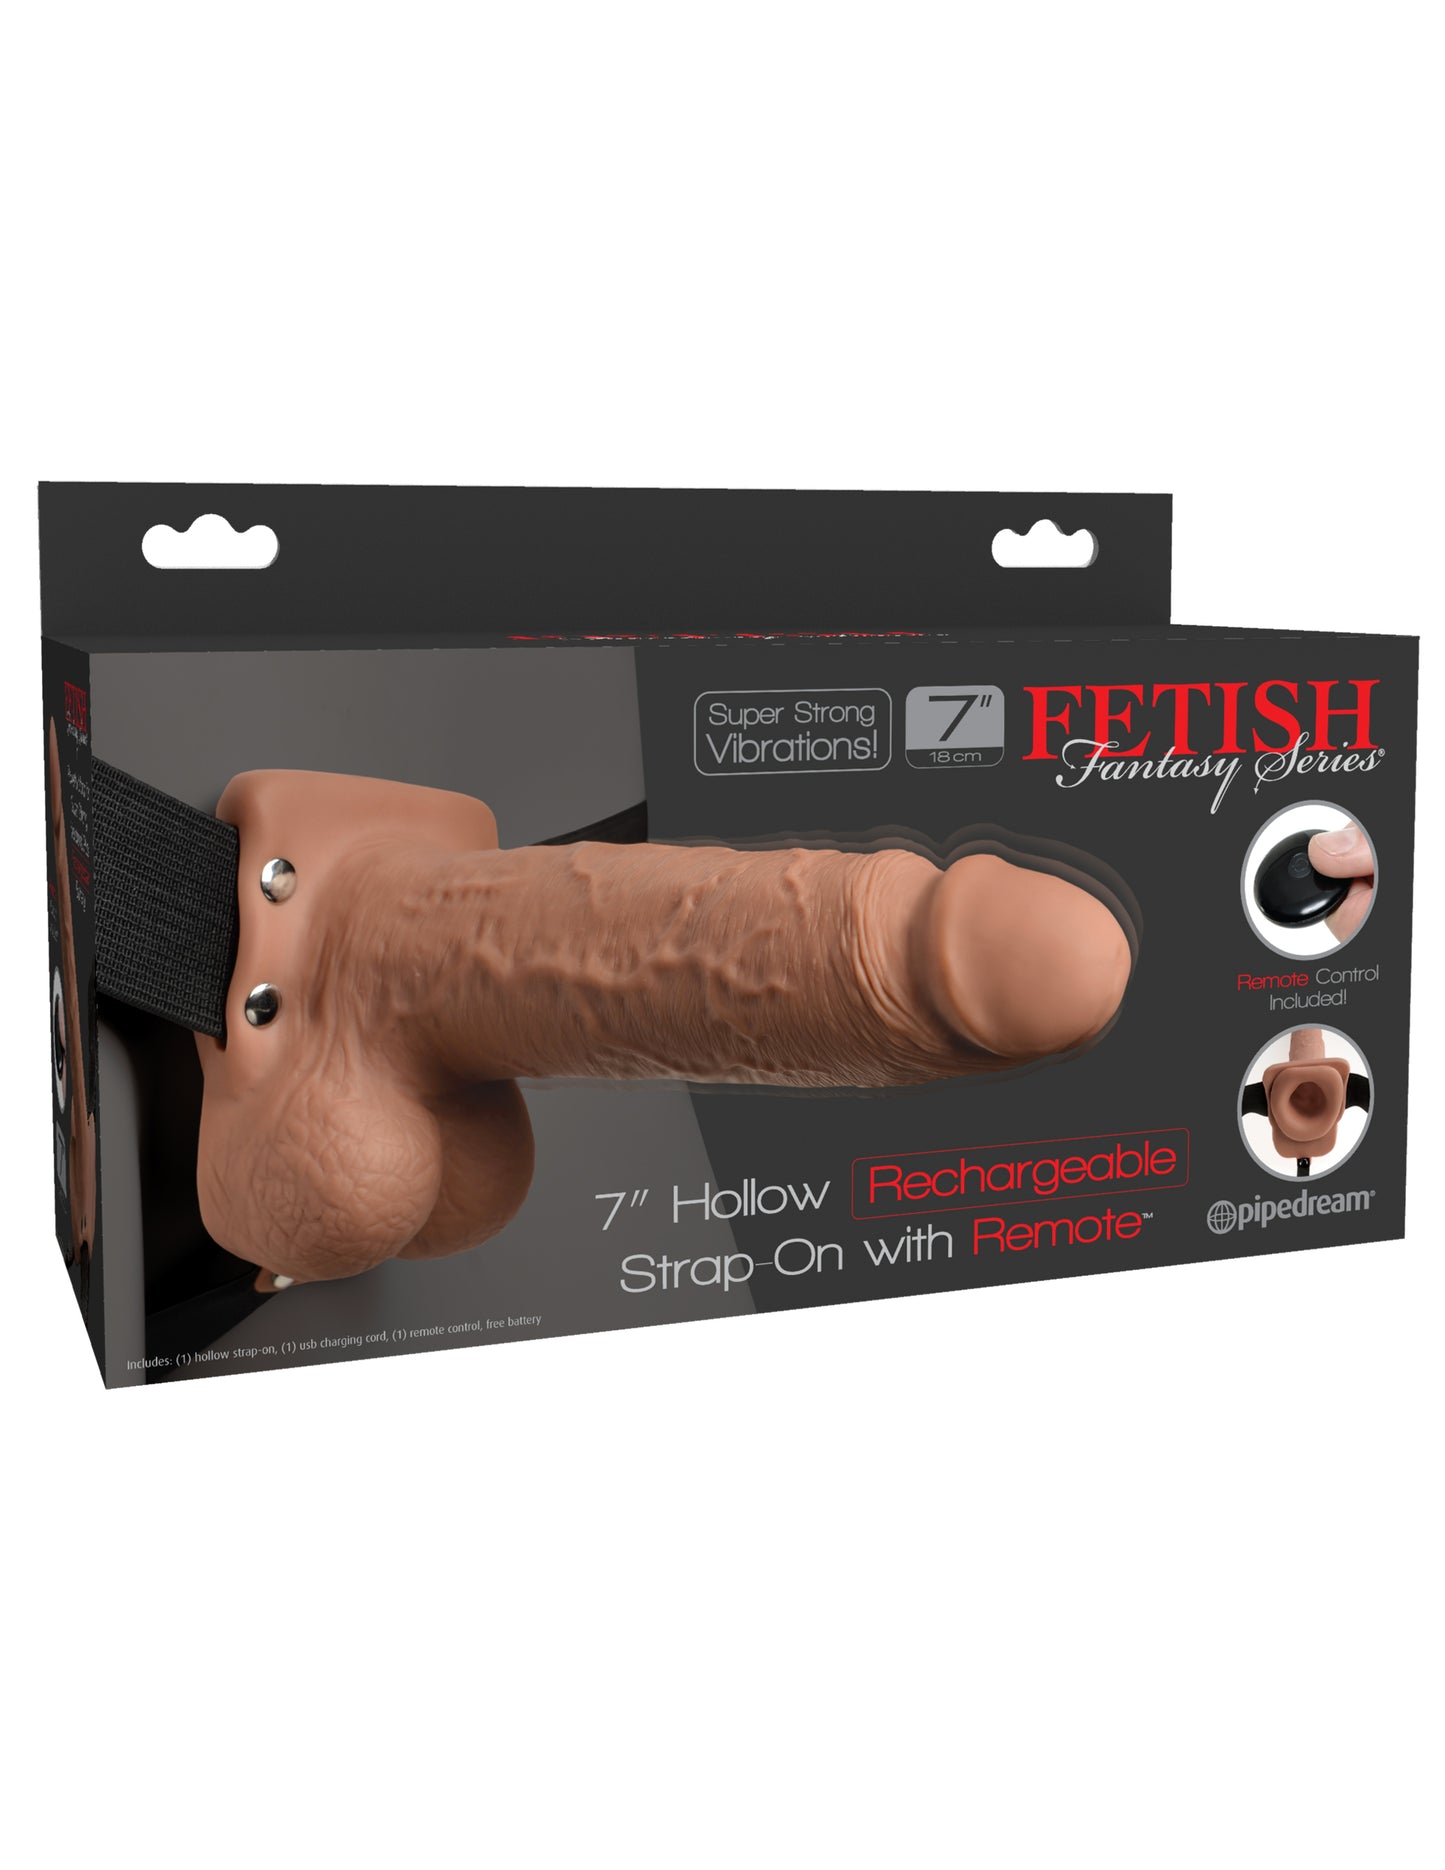 Fetish Fantasy Series 7 Inch Hollow Rechargeable Strap-on With Remote - Tan PD3391-22